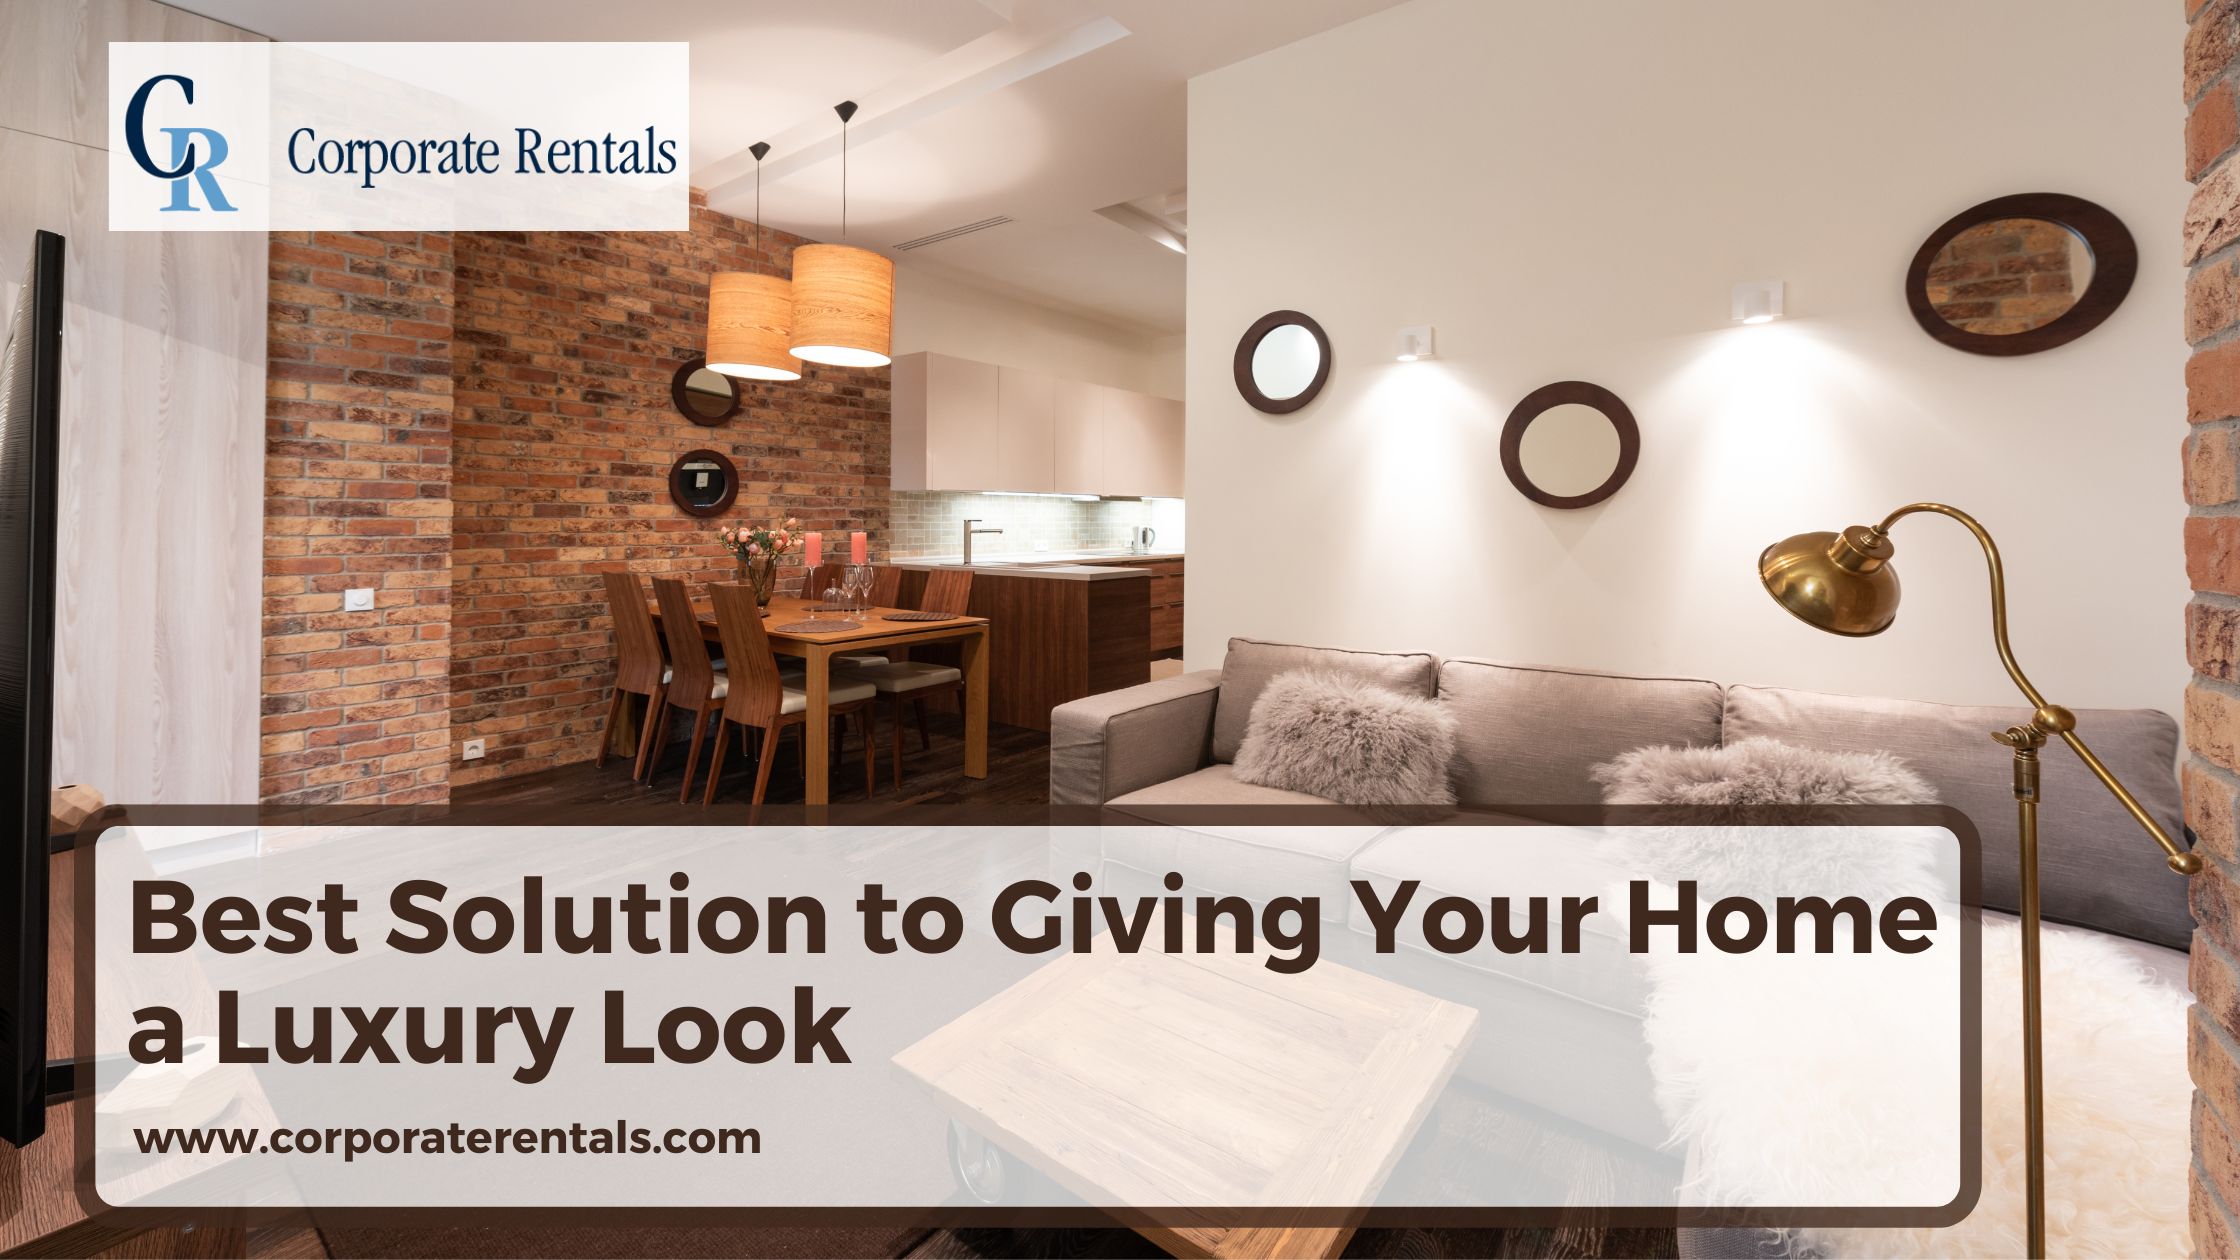 How Rental Furniture is The Best Solution to Giving Your Home a Luxury Look